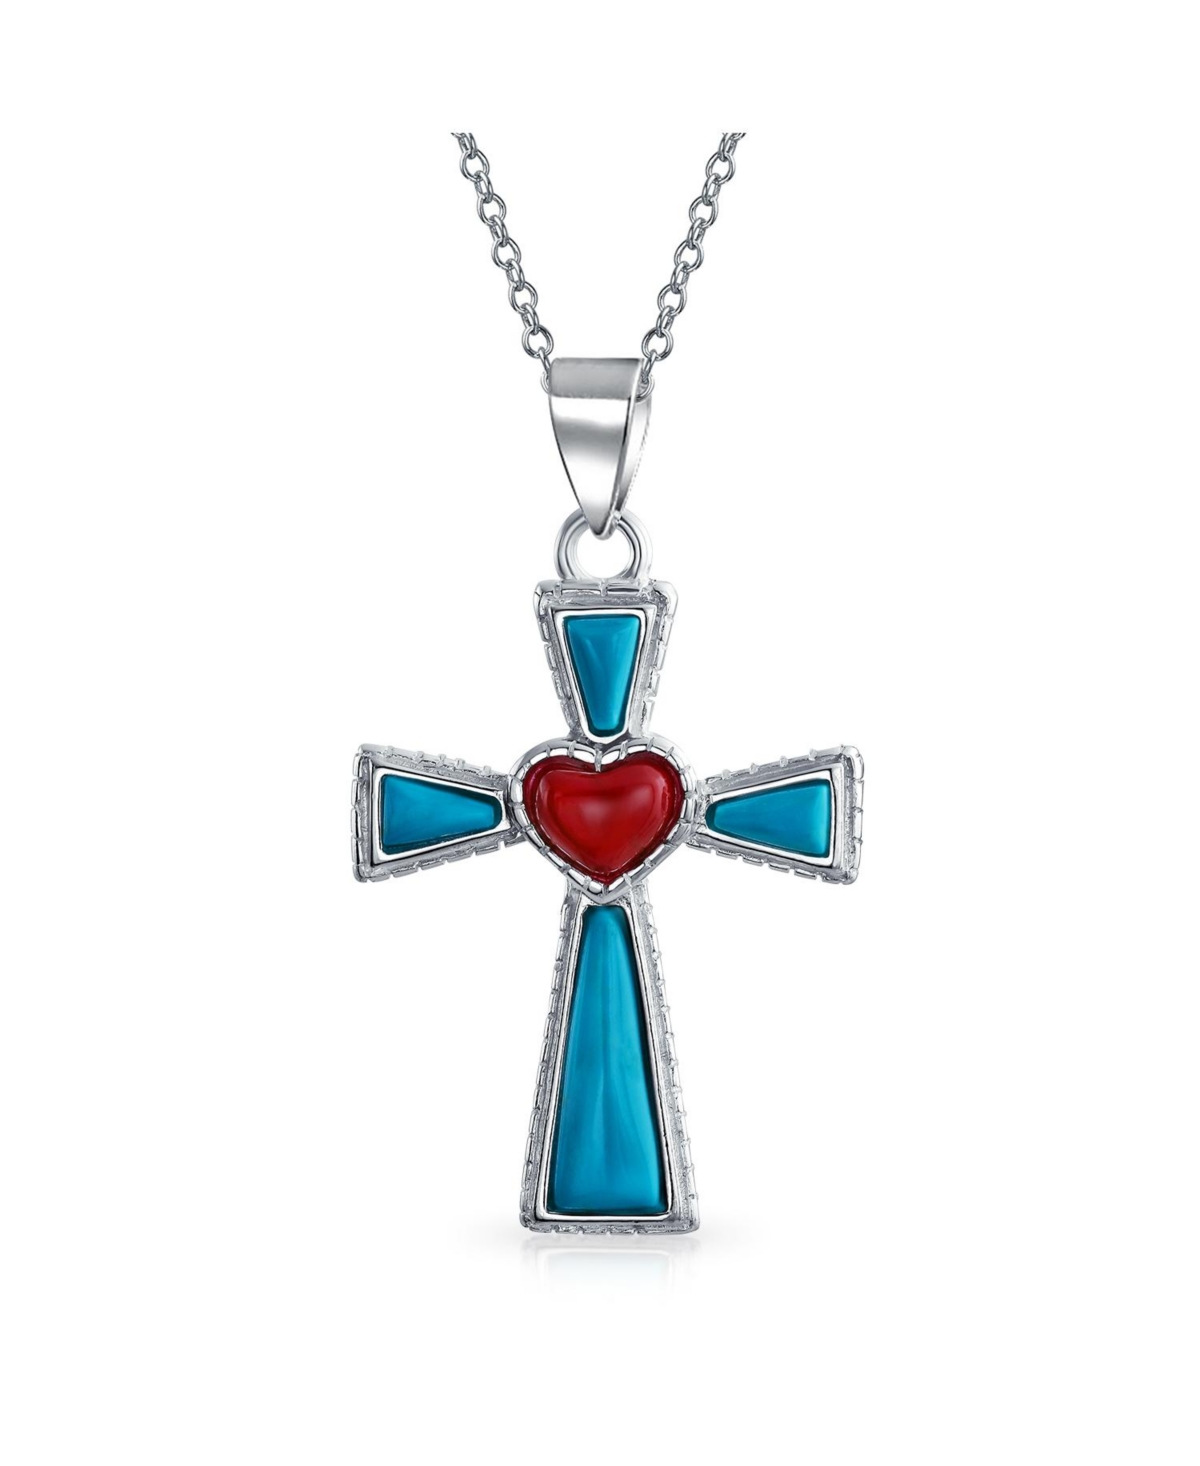 South Western Style Gemstone Blue Stabilized Turquoise Red Heart Cross Pendant Religious .925 Sterling Silver Necklace For Women Teen -